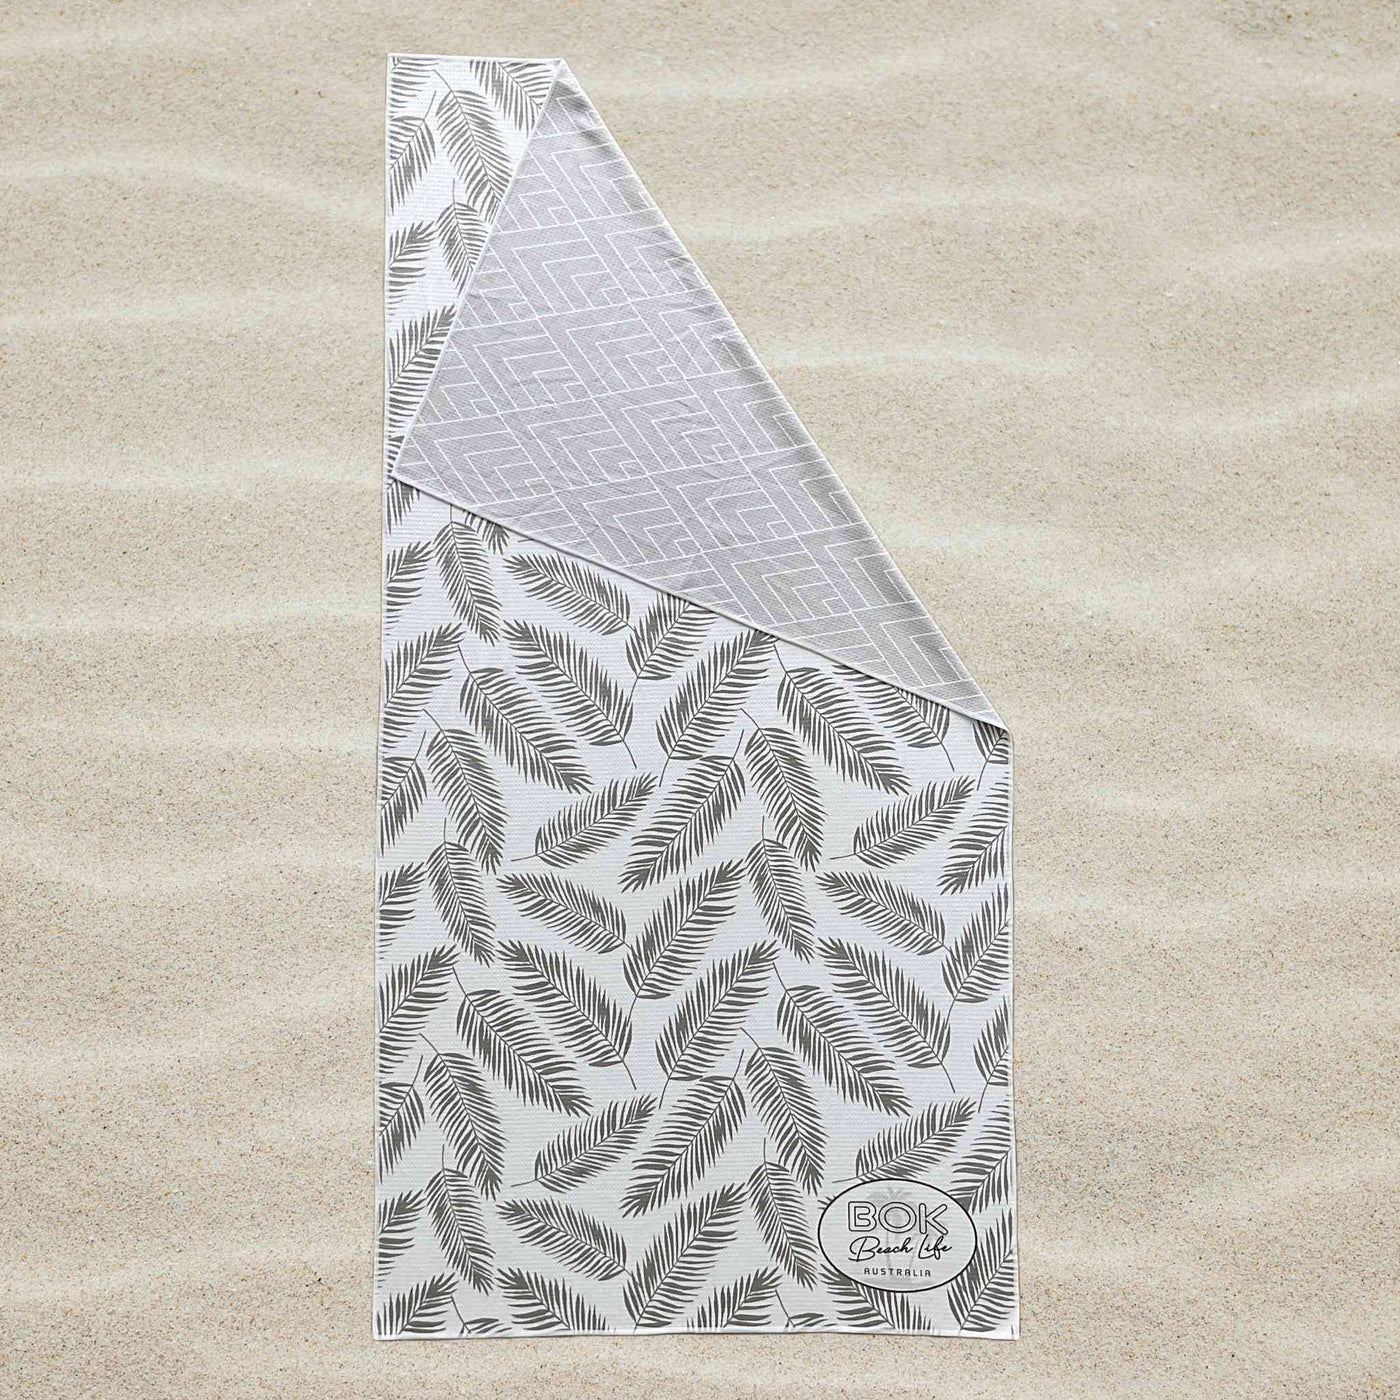 Coastal Luxe Sand Free Towel. Towel is 160cm x 80cm. Reversible 2 sided feather and chevron design in black white and grey.